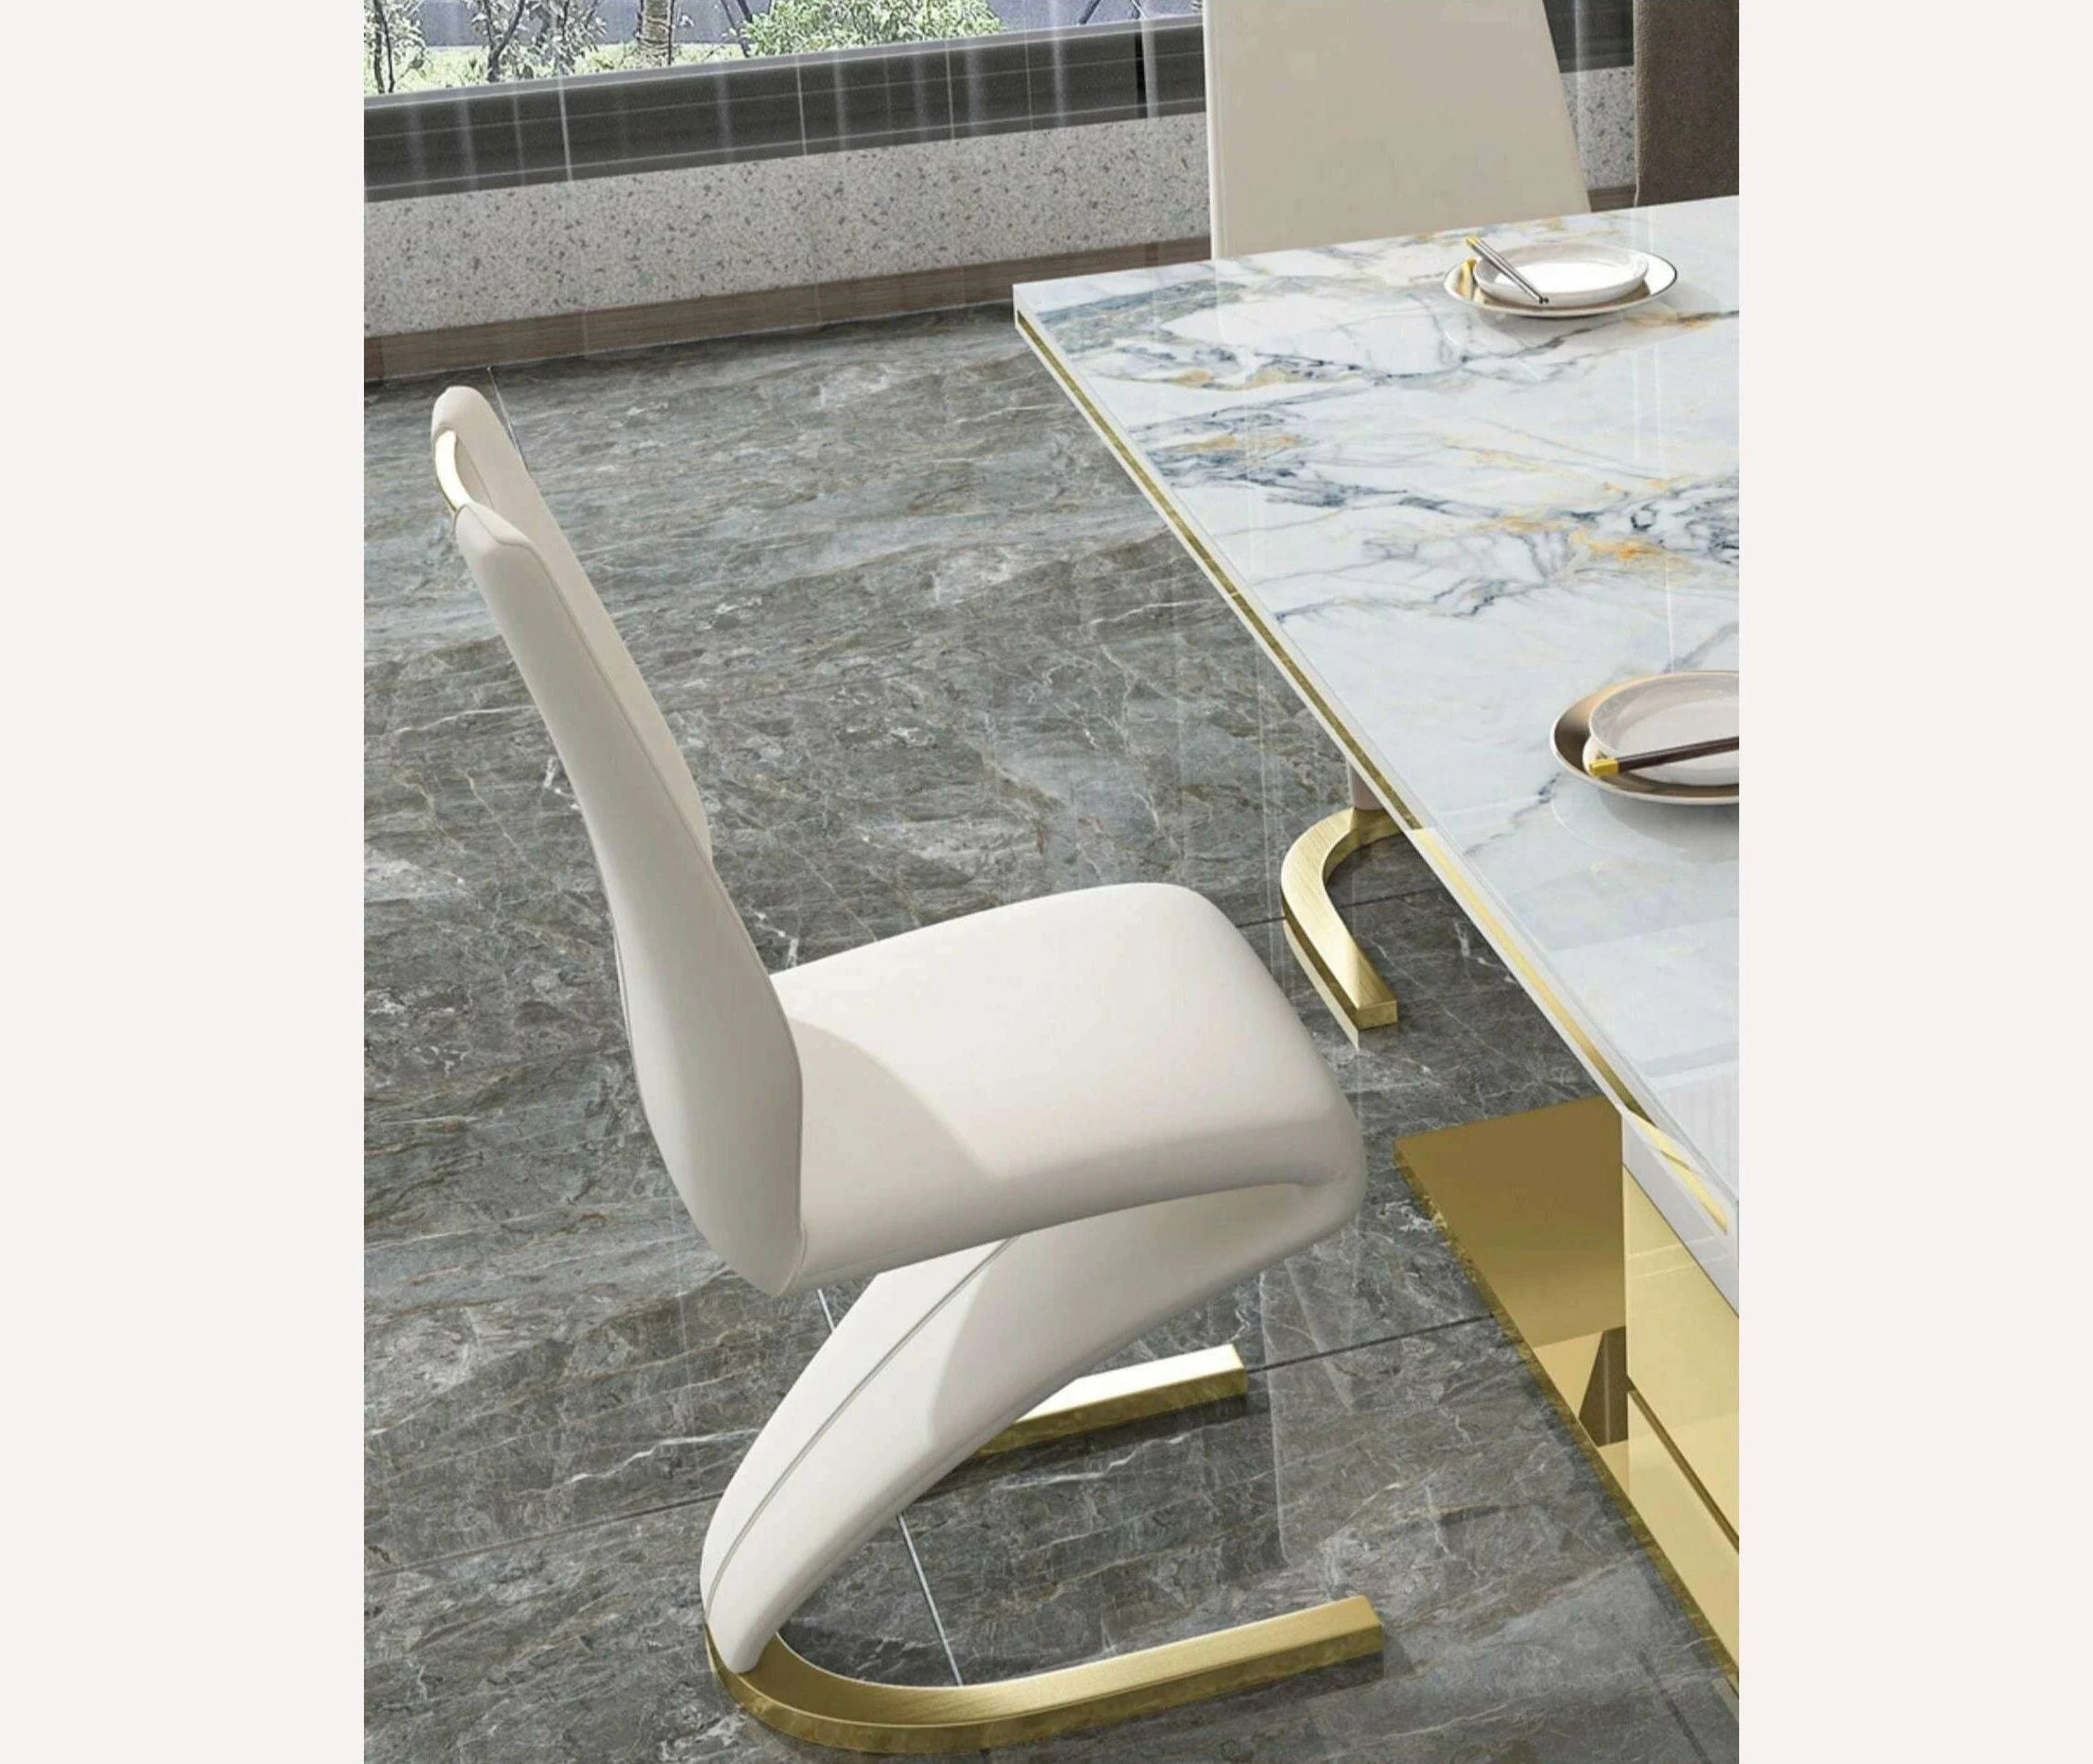 KIMLUD, Linlamlim White Paint Stainless Steel Dining Table and 6 Chairs Mesas De Comedor for Dining room Mordern Home Kitchen Furniture, KIMLUD Womens Clothes